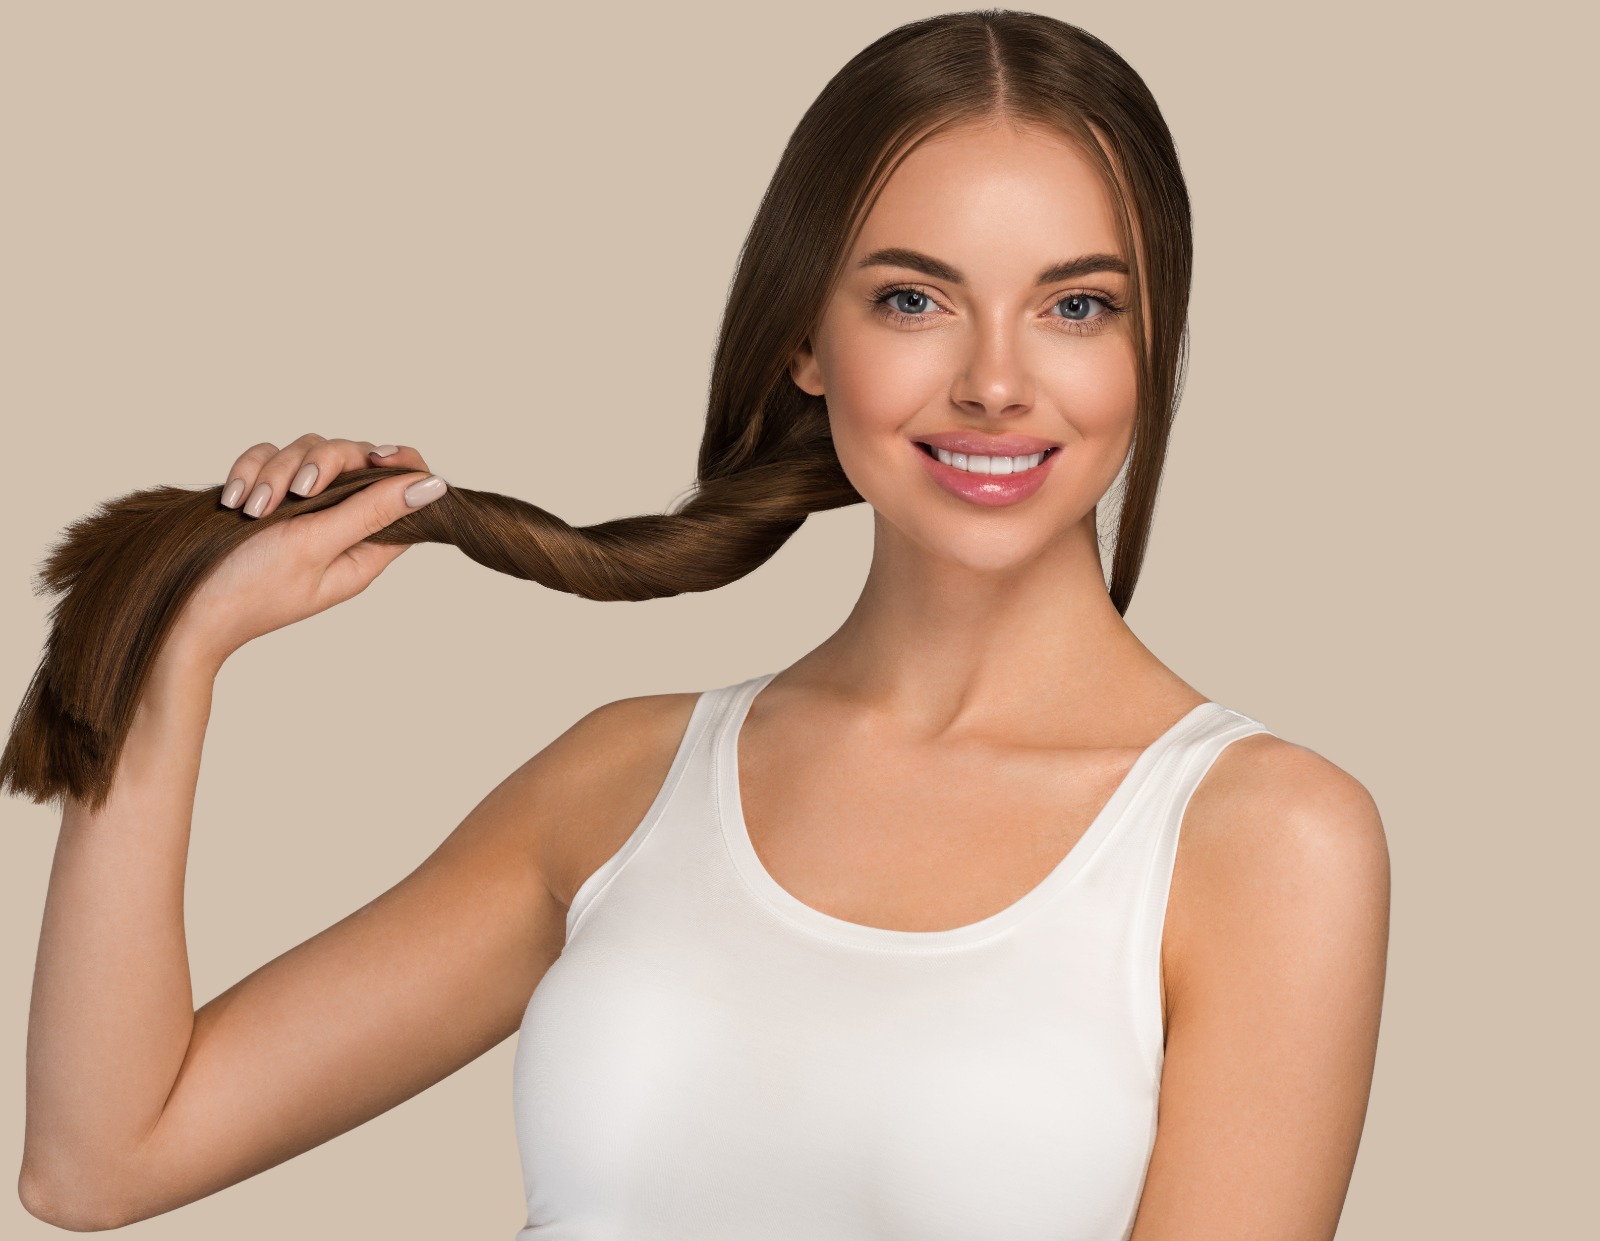 How long does it take to grow hair after cutting?